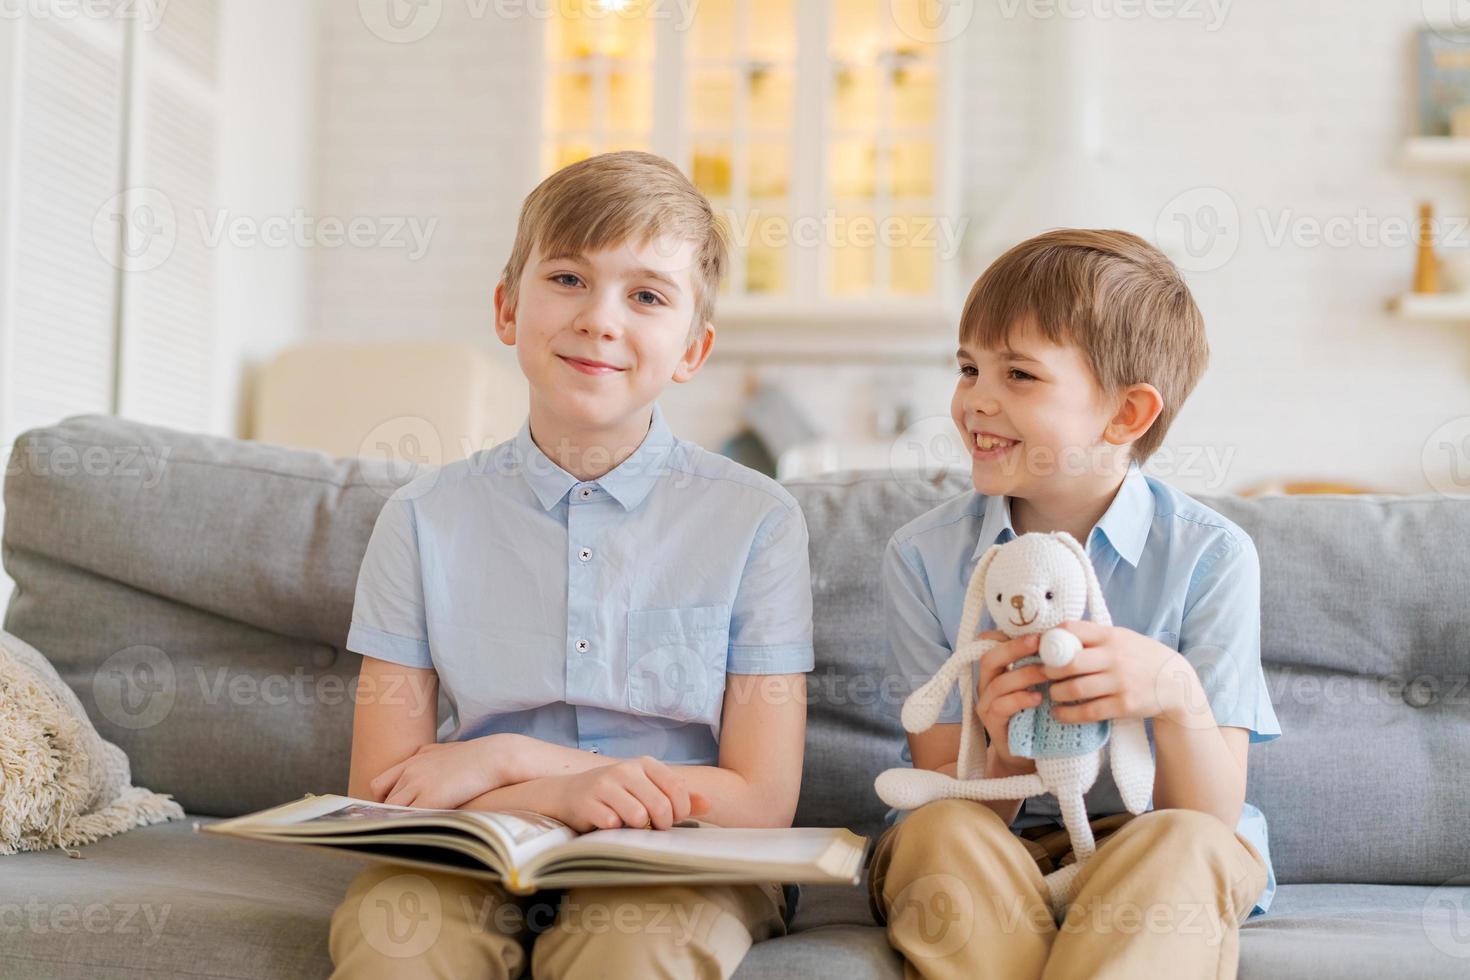 Two boys sitting on couch are reading book. Older brother reads interesting photo